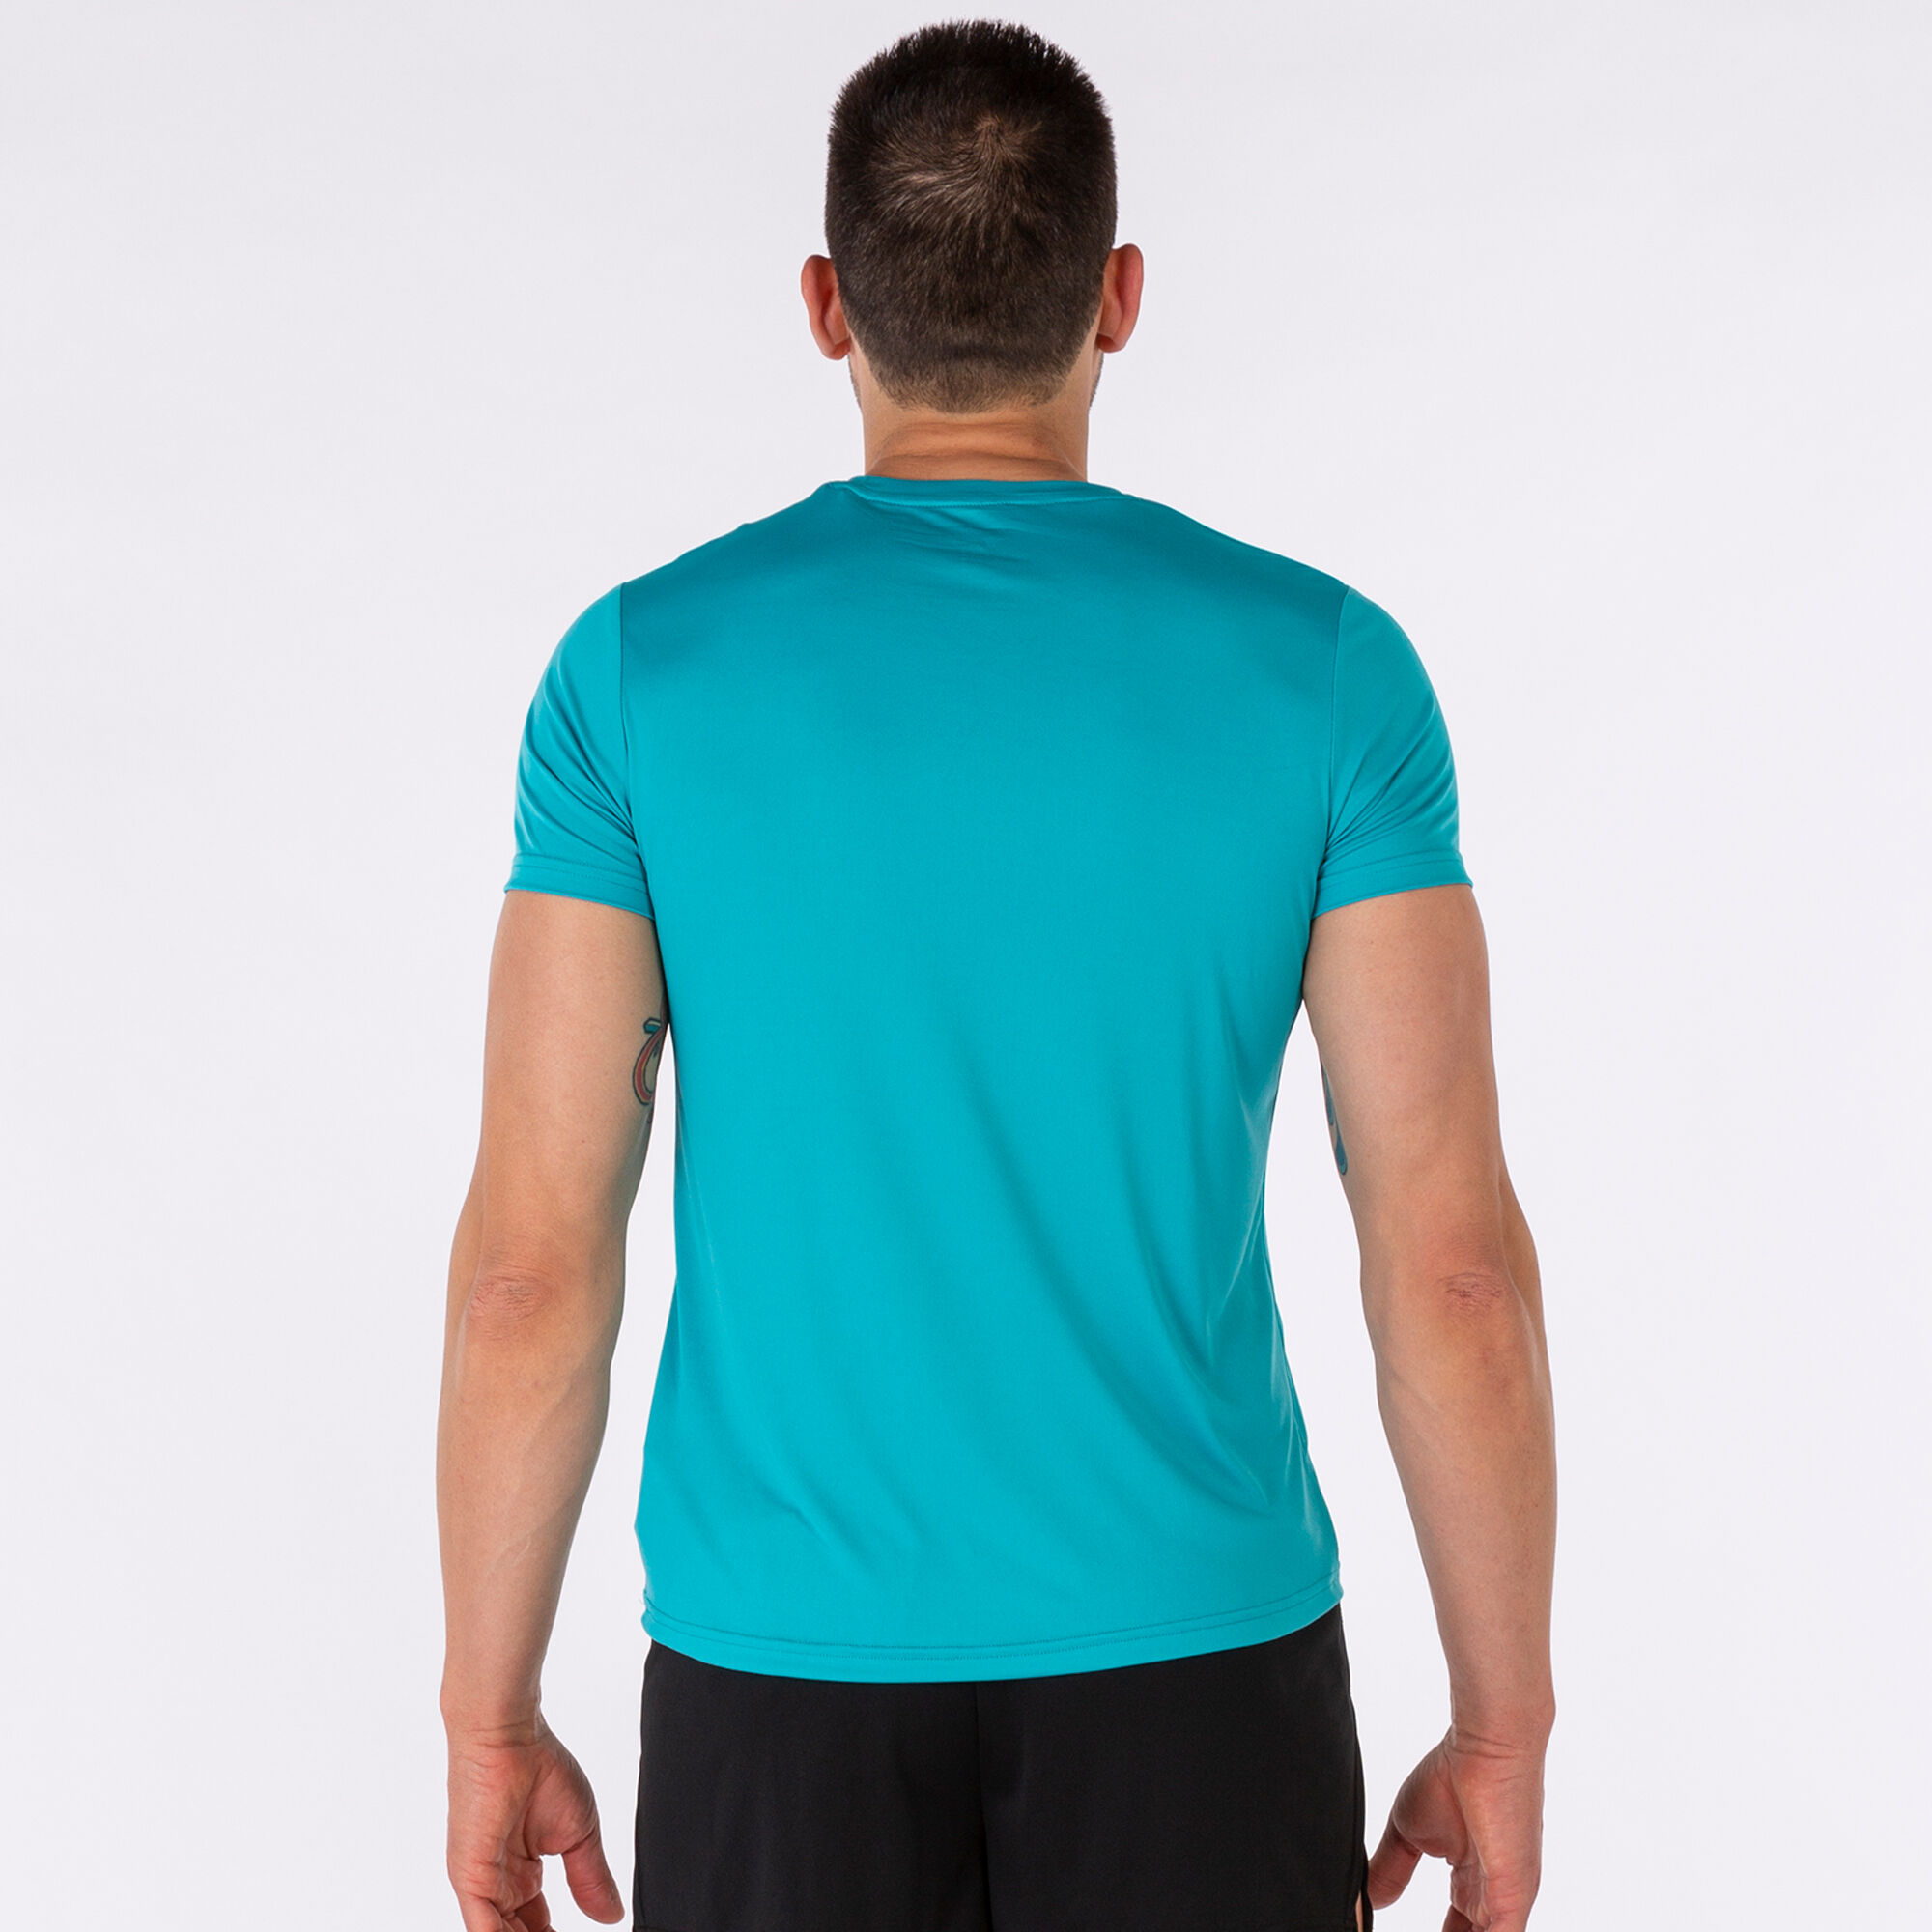 MAILLOT MANCHES COURTES HOMME RECORD II TURQUOISE